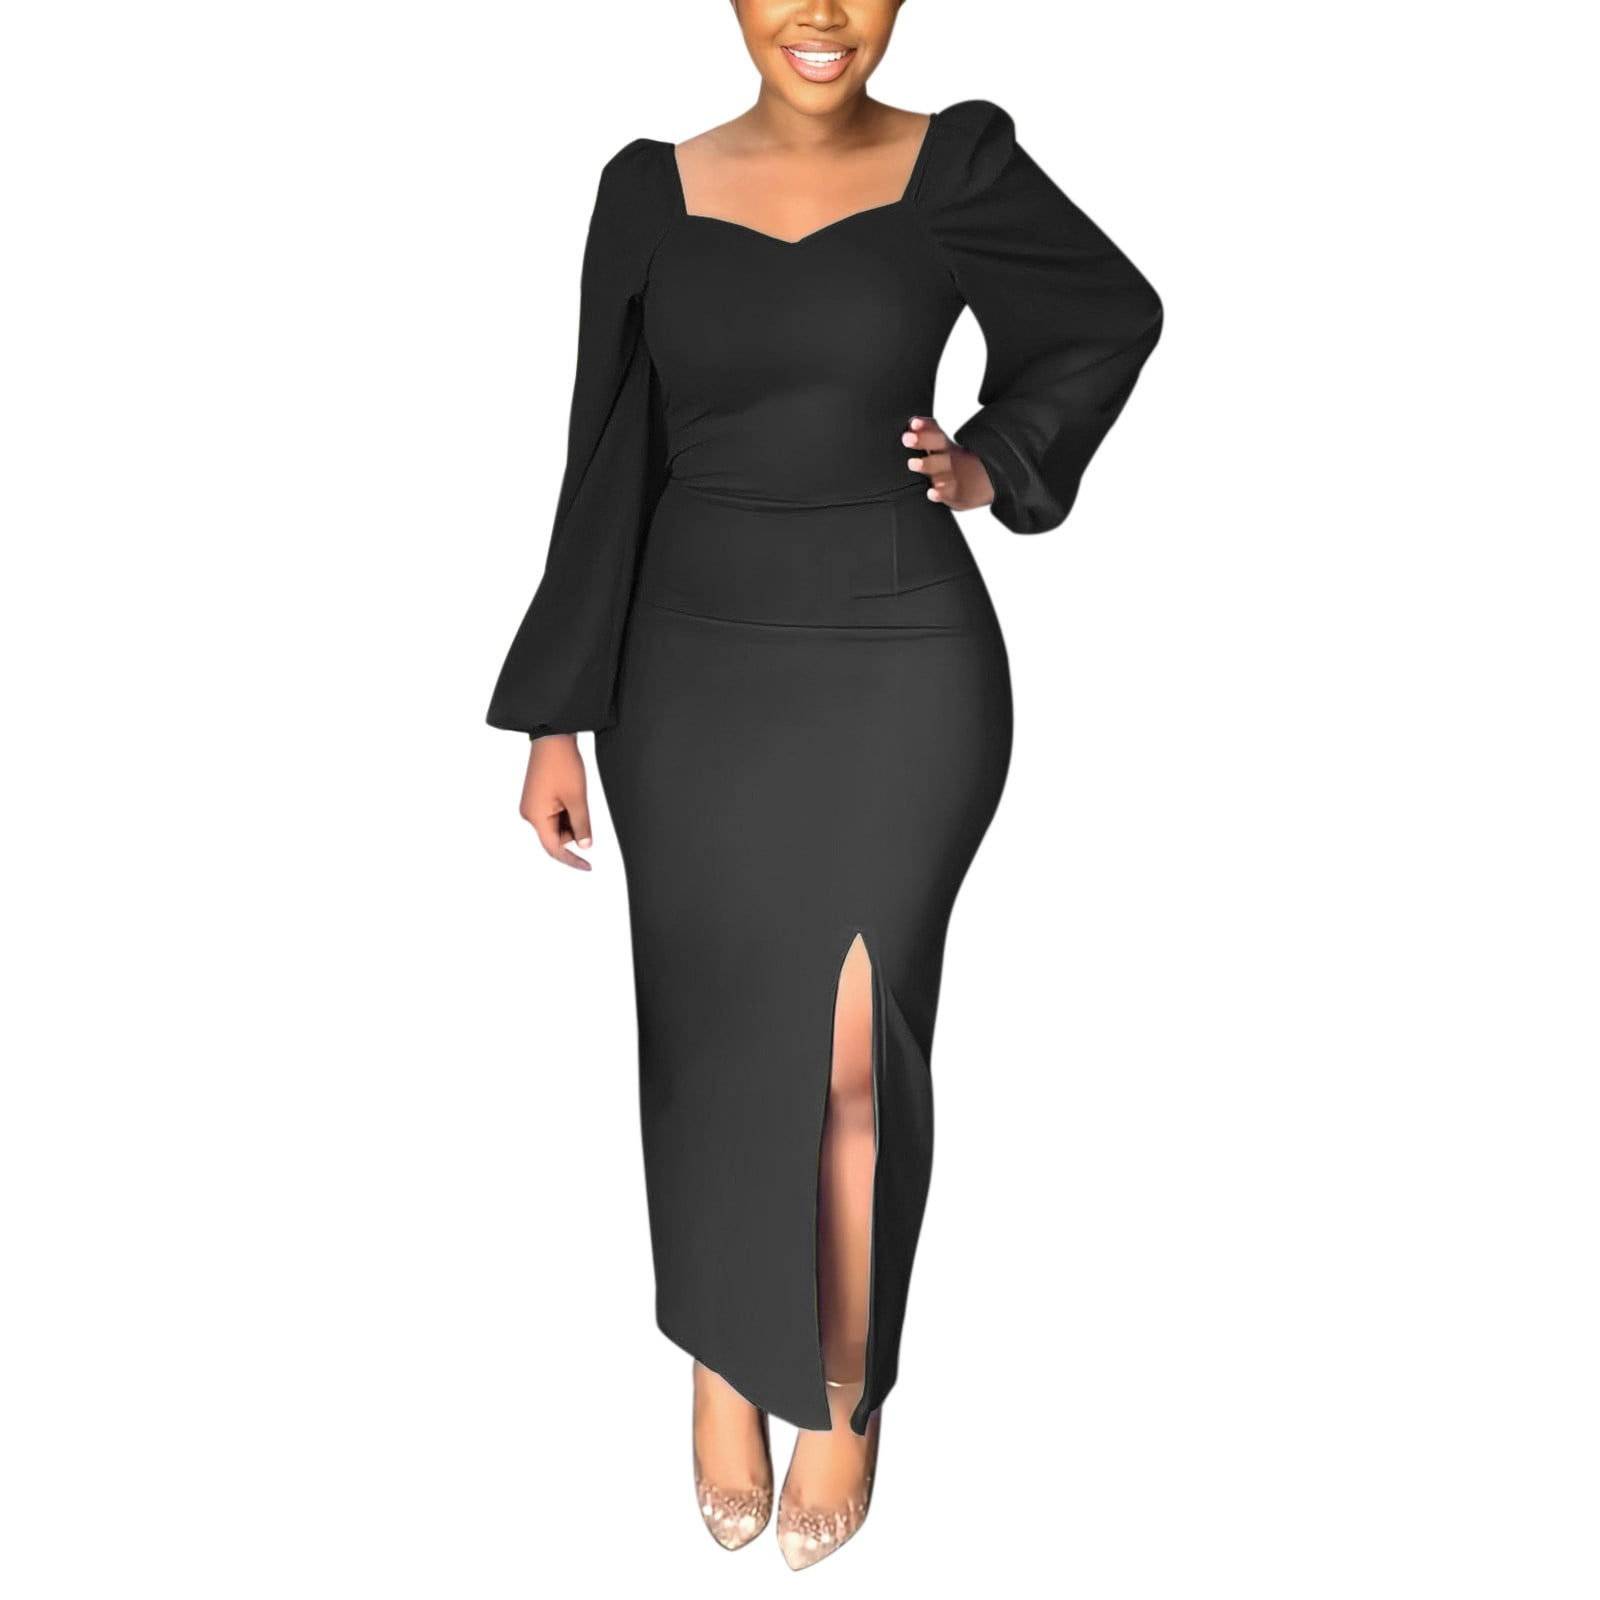 PMUYBHF Wedding Guest Dresses for Women Plus Size with Sleeves